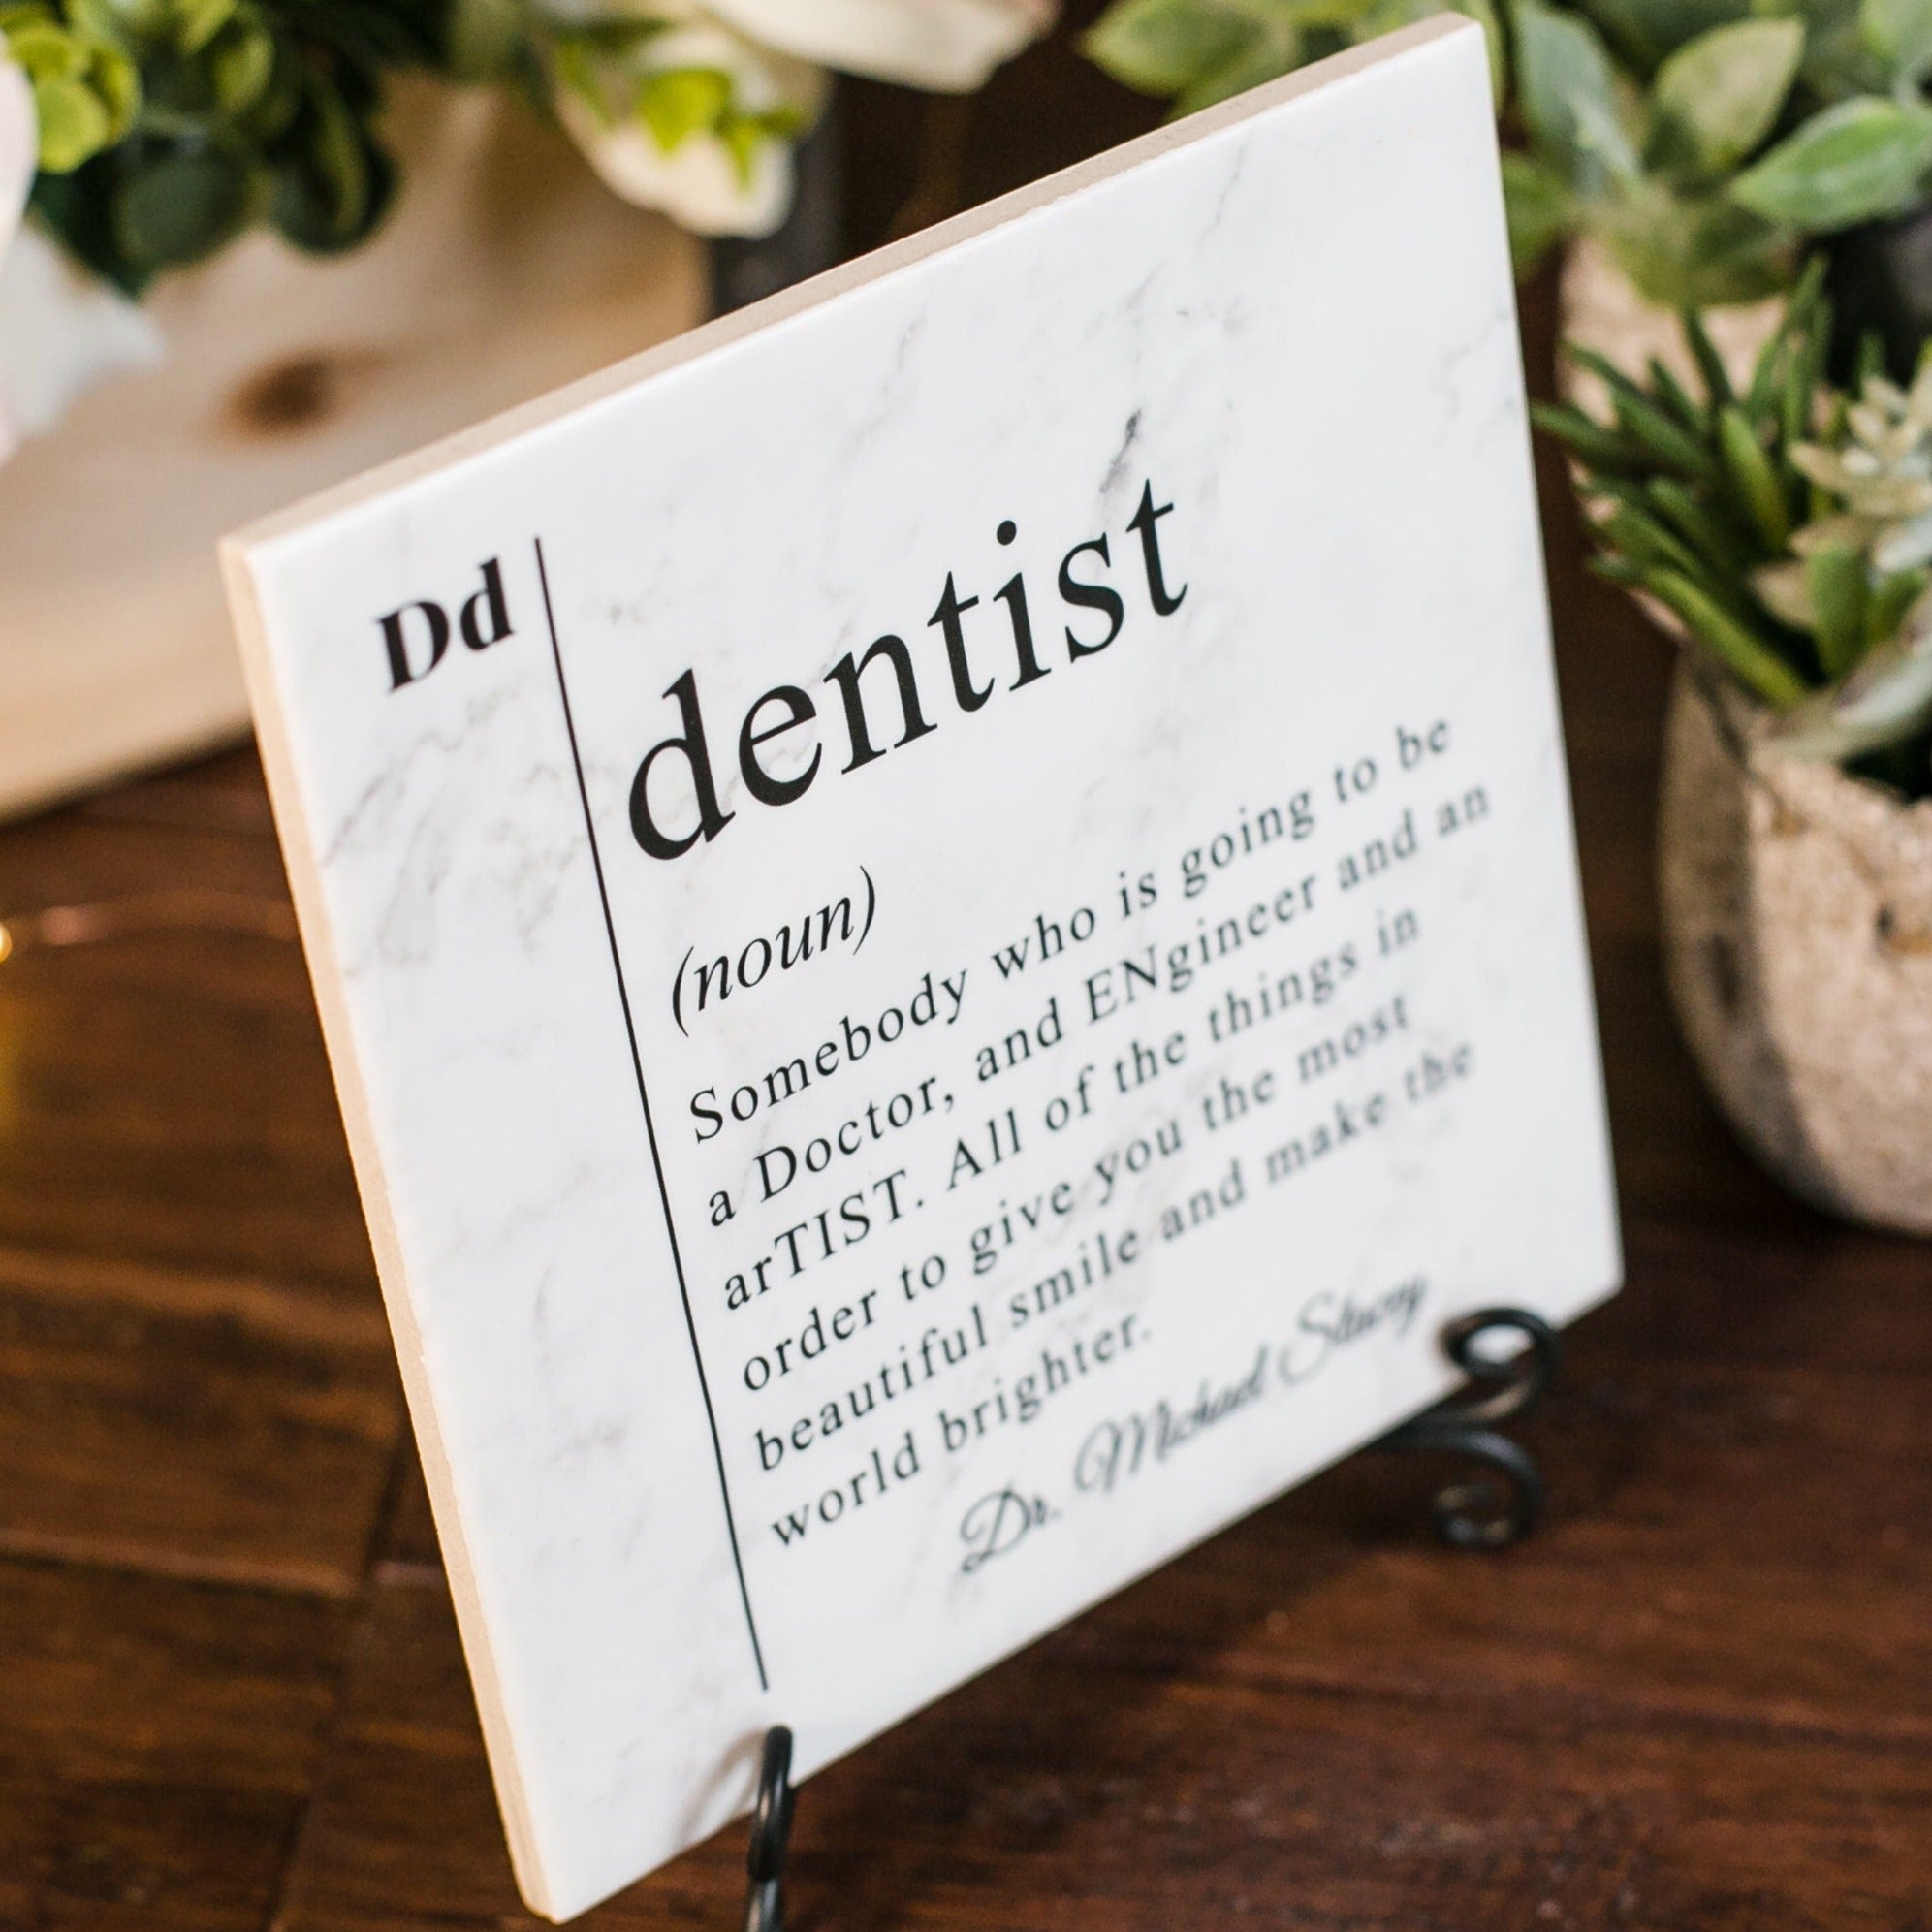 Dentist Definition Thank You Appreciation Plaque With Stand, Dentist's Day Recognition Gift, Dentistry Orthodontist Oral Surgeon DDS Sign